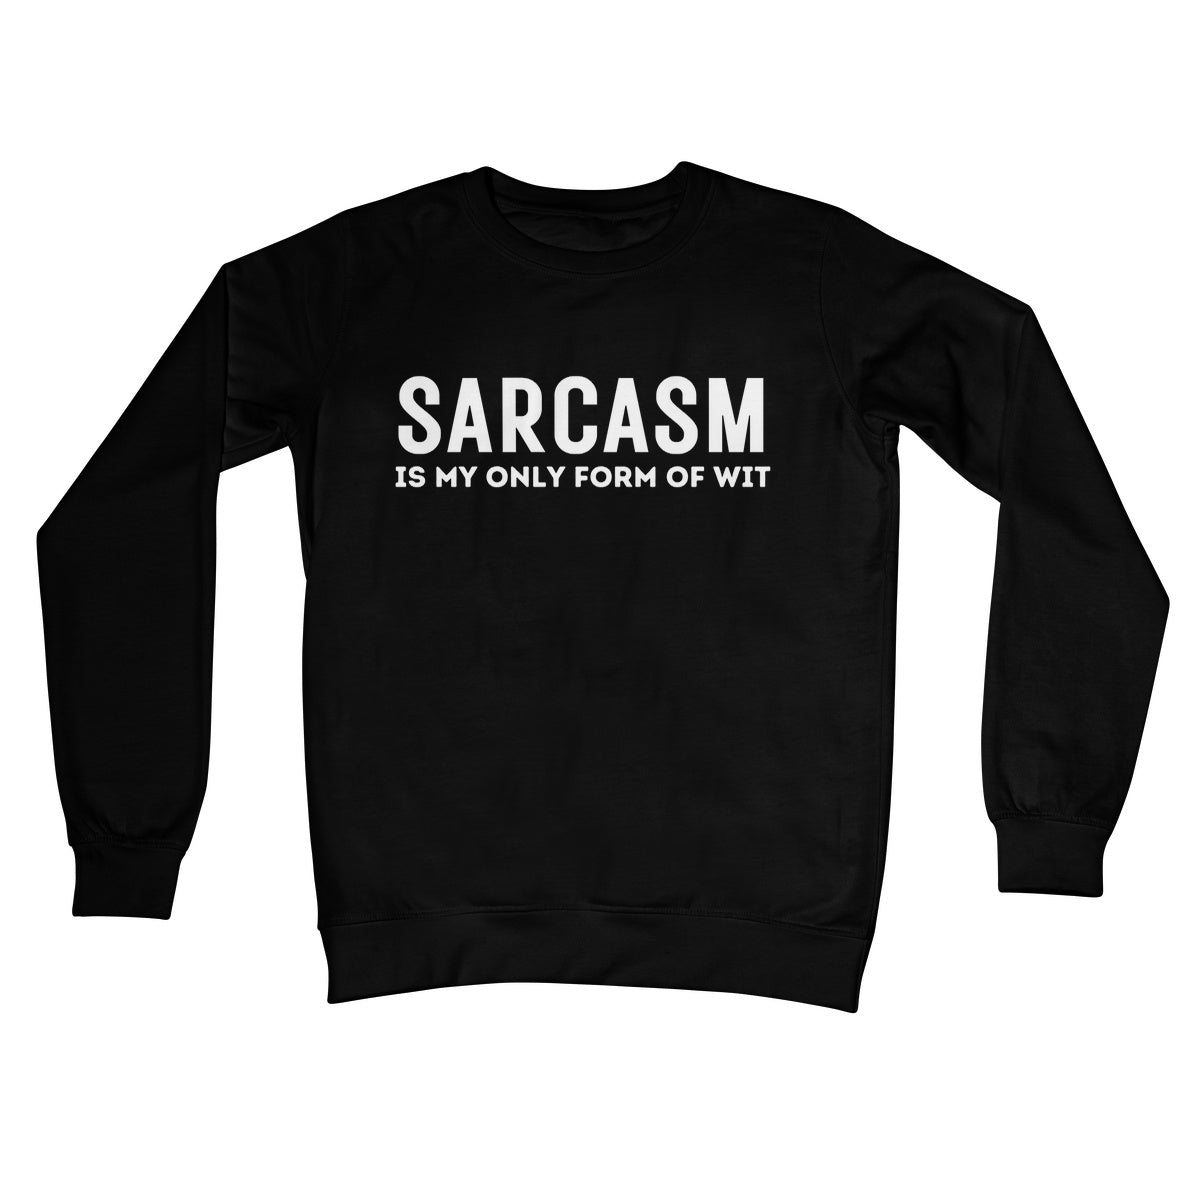 sarcasm is my only form of wit jumper black